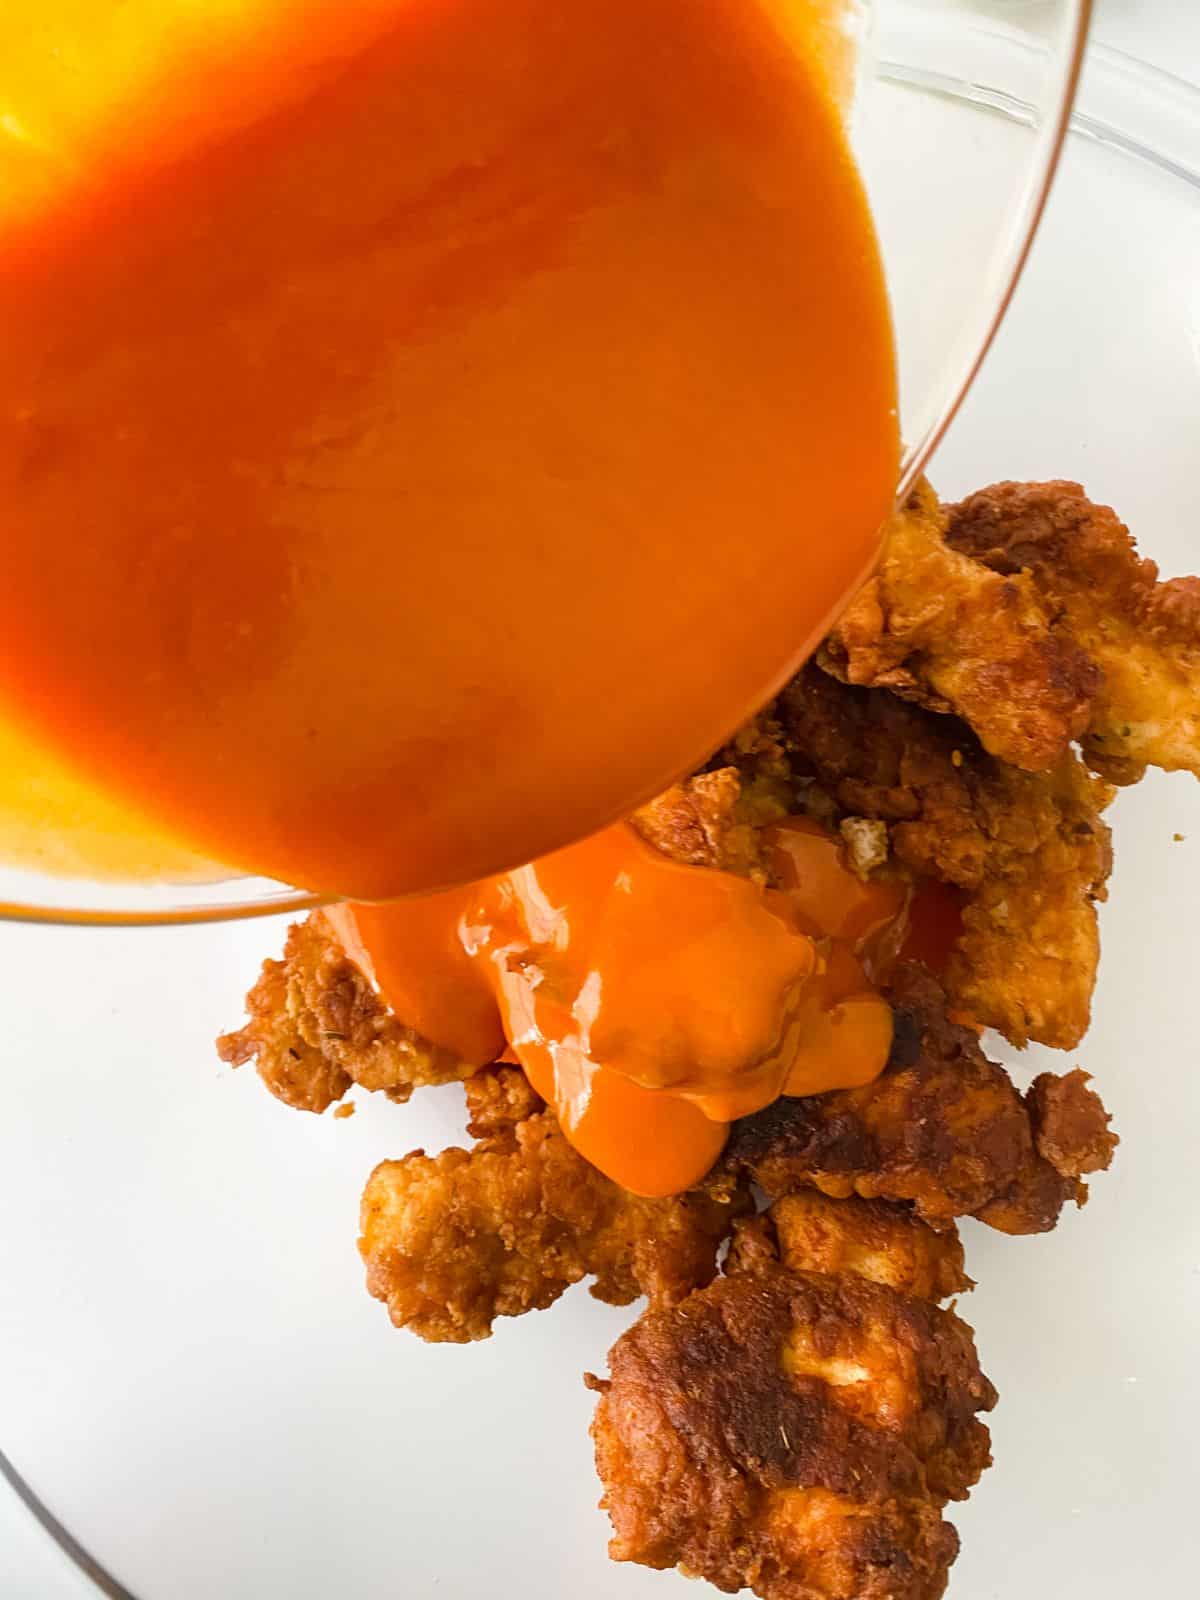 buffalo sauce being poured over fried chicken pieces